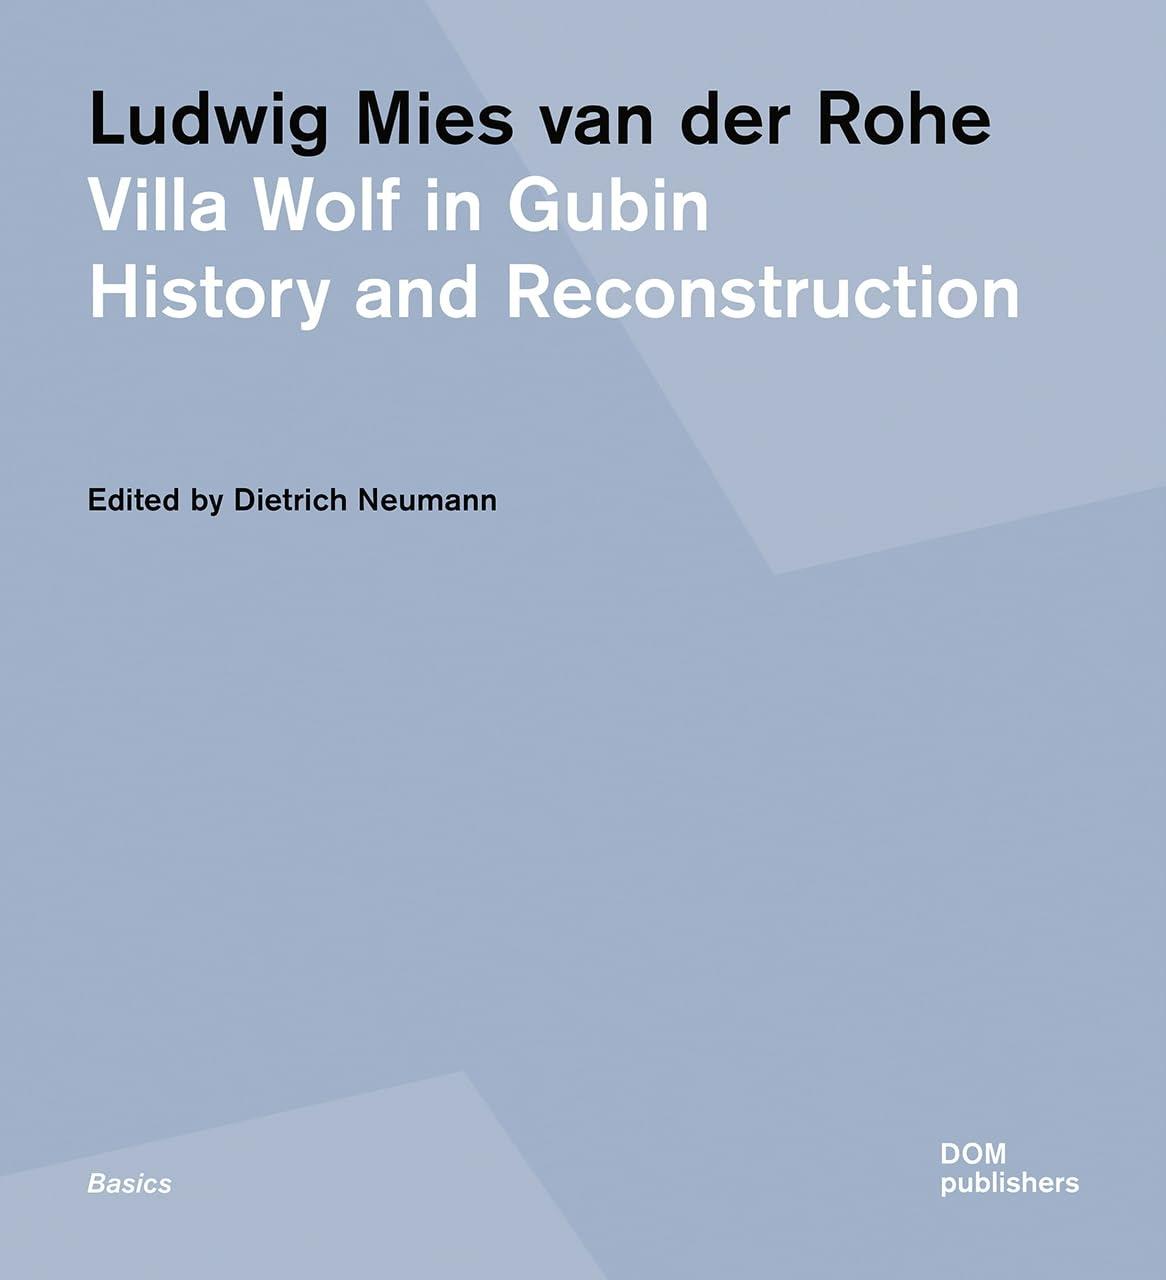 LUDWIG MIES VAN DER ROHE VILLA WOLF IN GUBIN:HISTORY AND RECONSTRUCTION